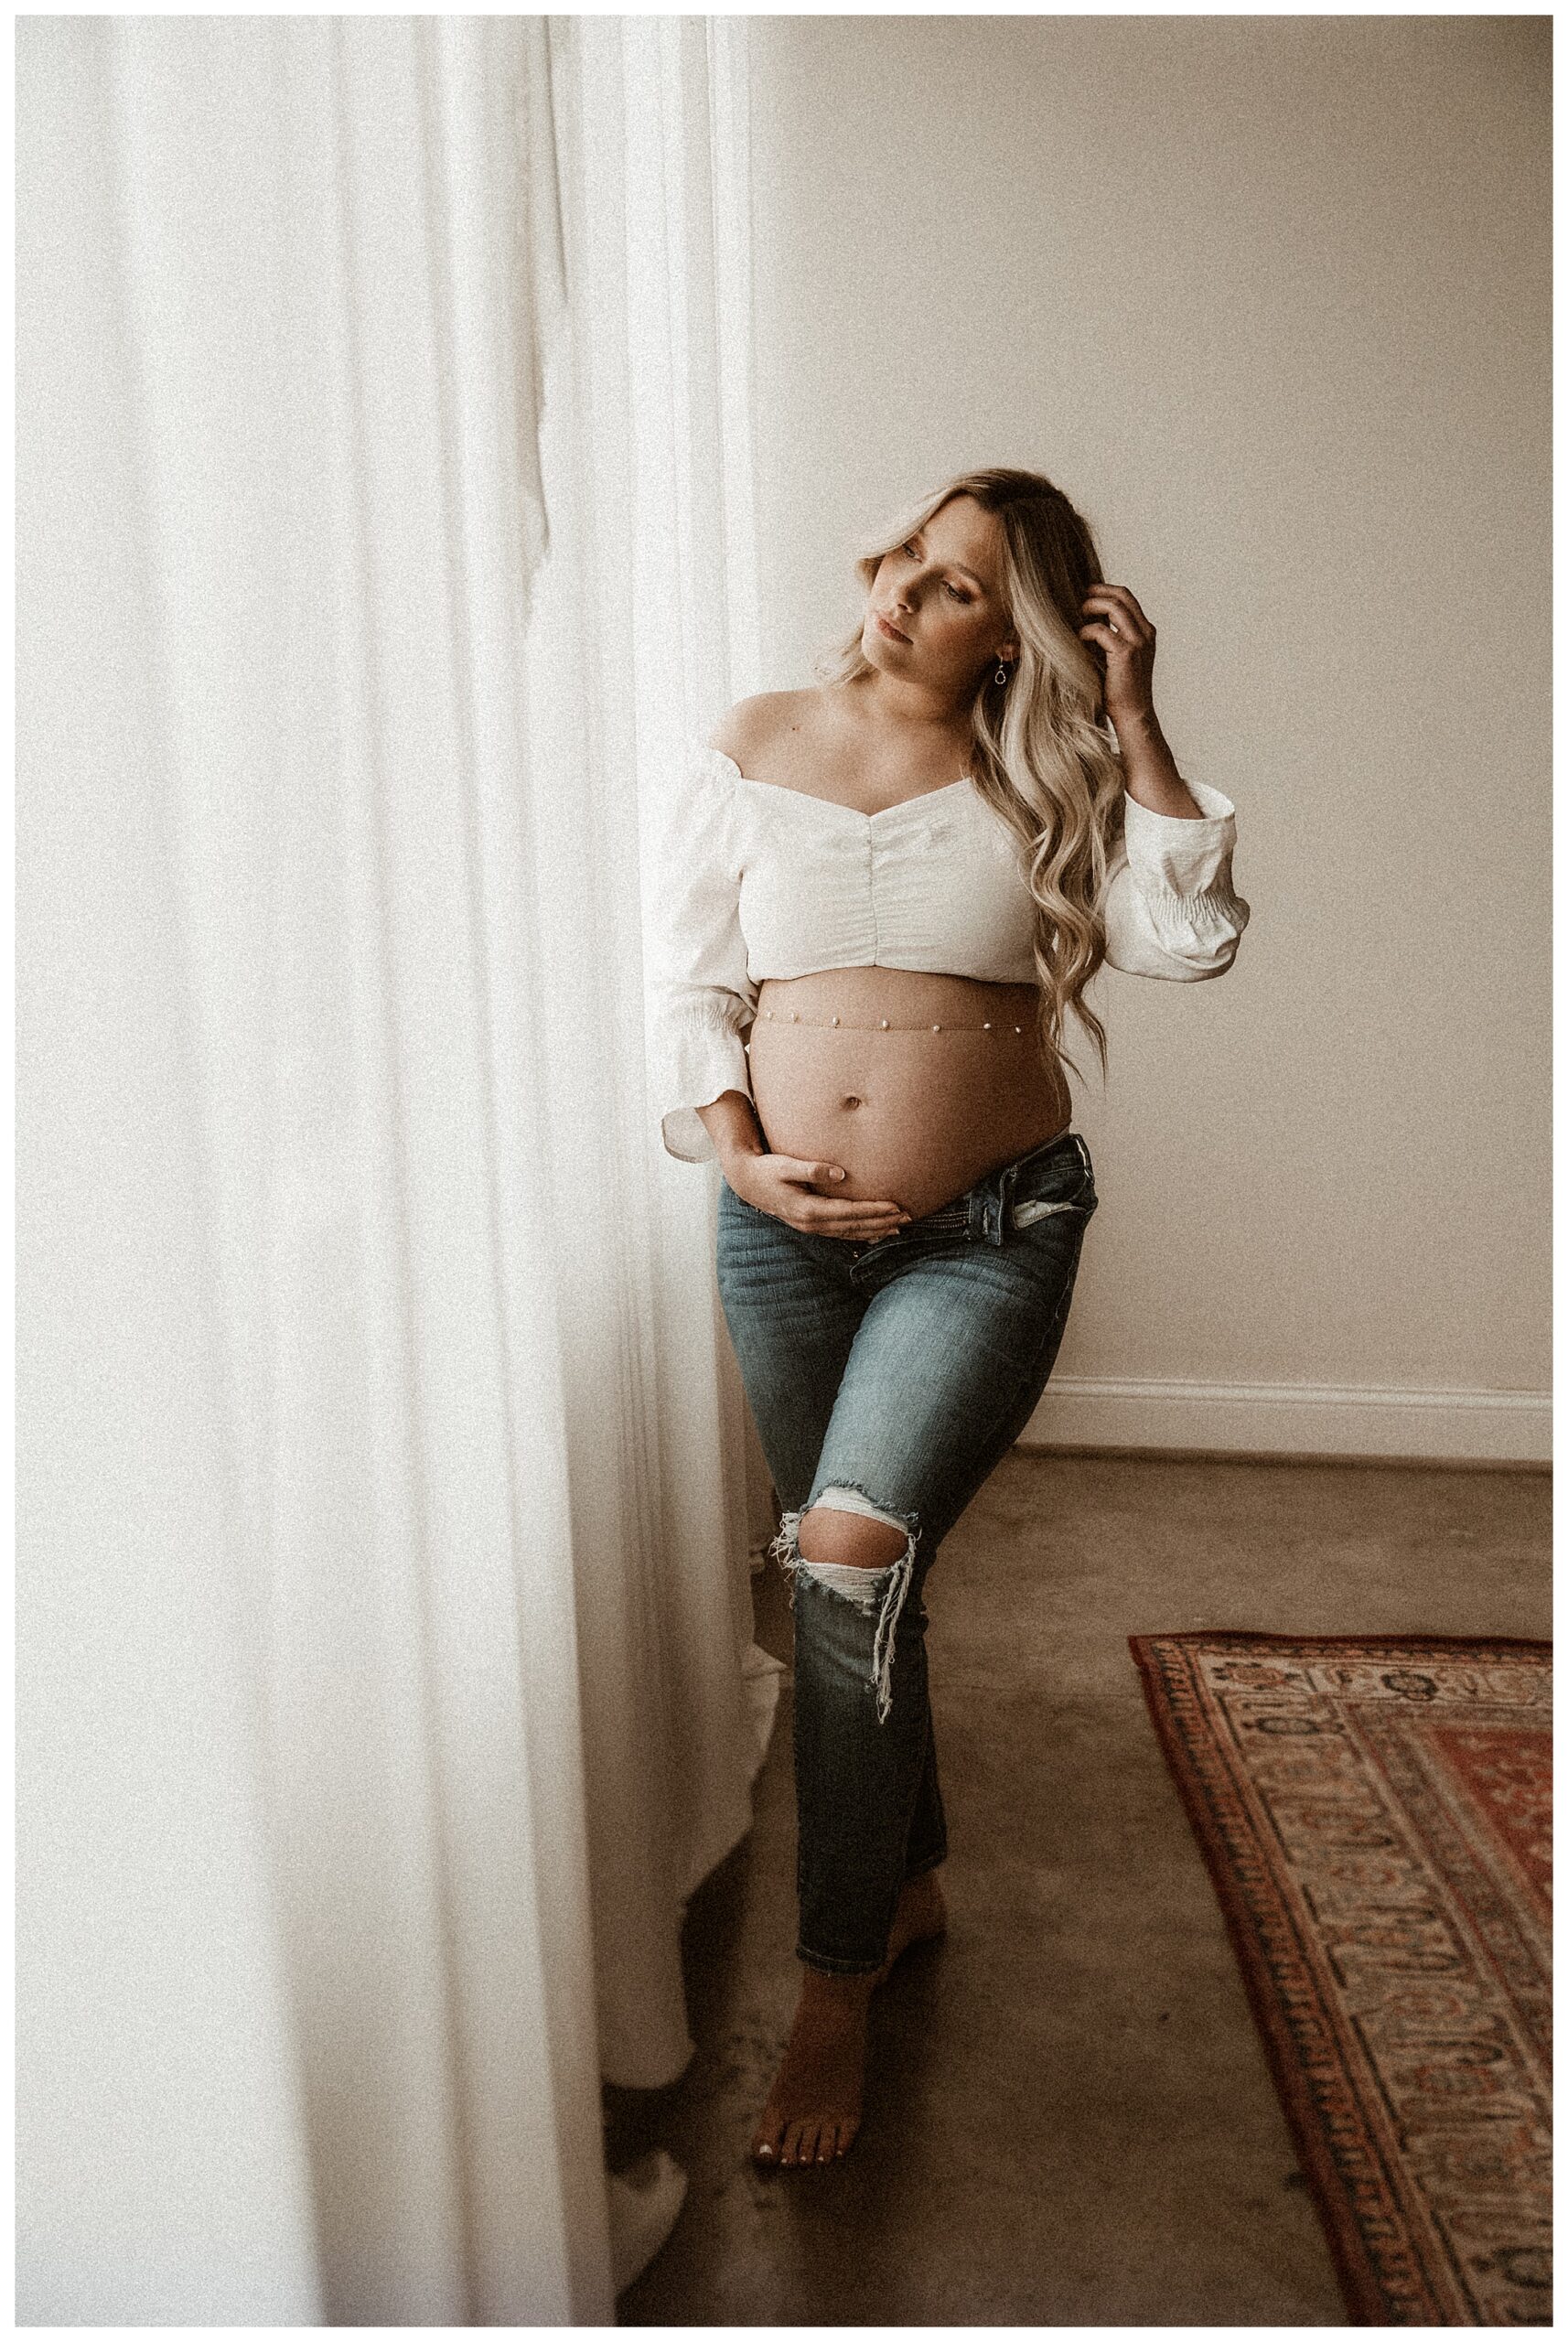 ripped jeans and white shirt maternity session in studio with persian rug. clean and moody portrait of mother fixing her hair